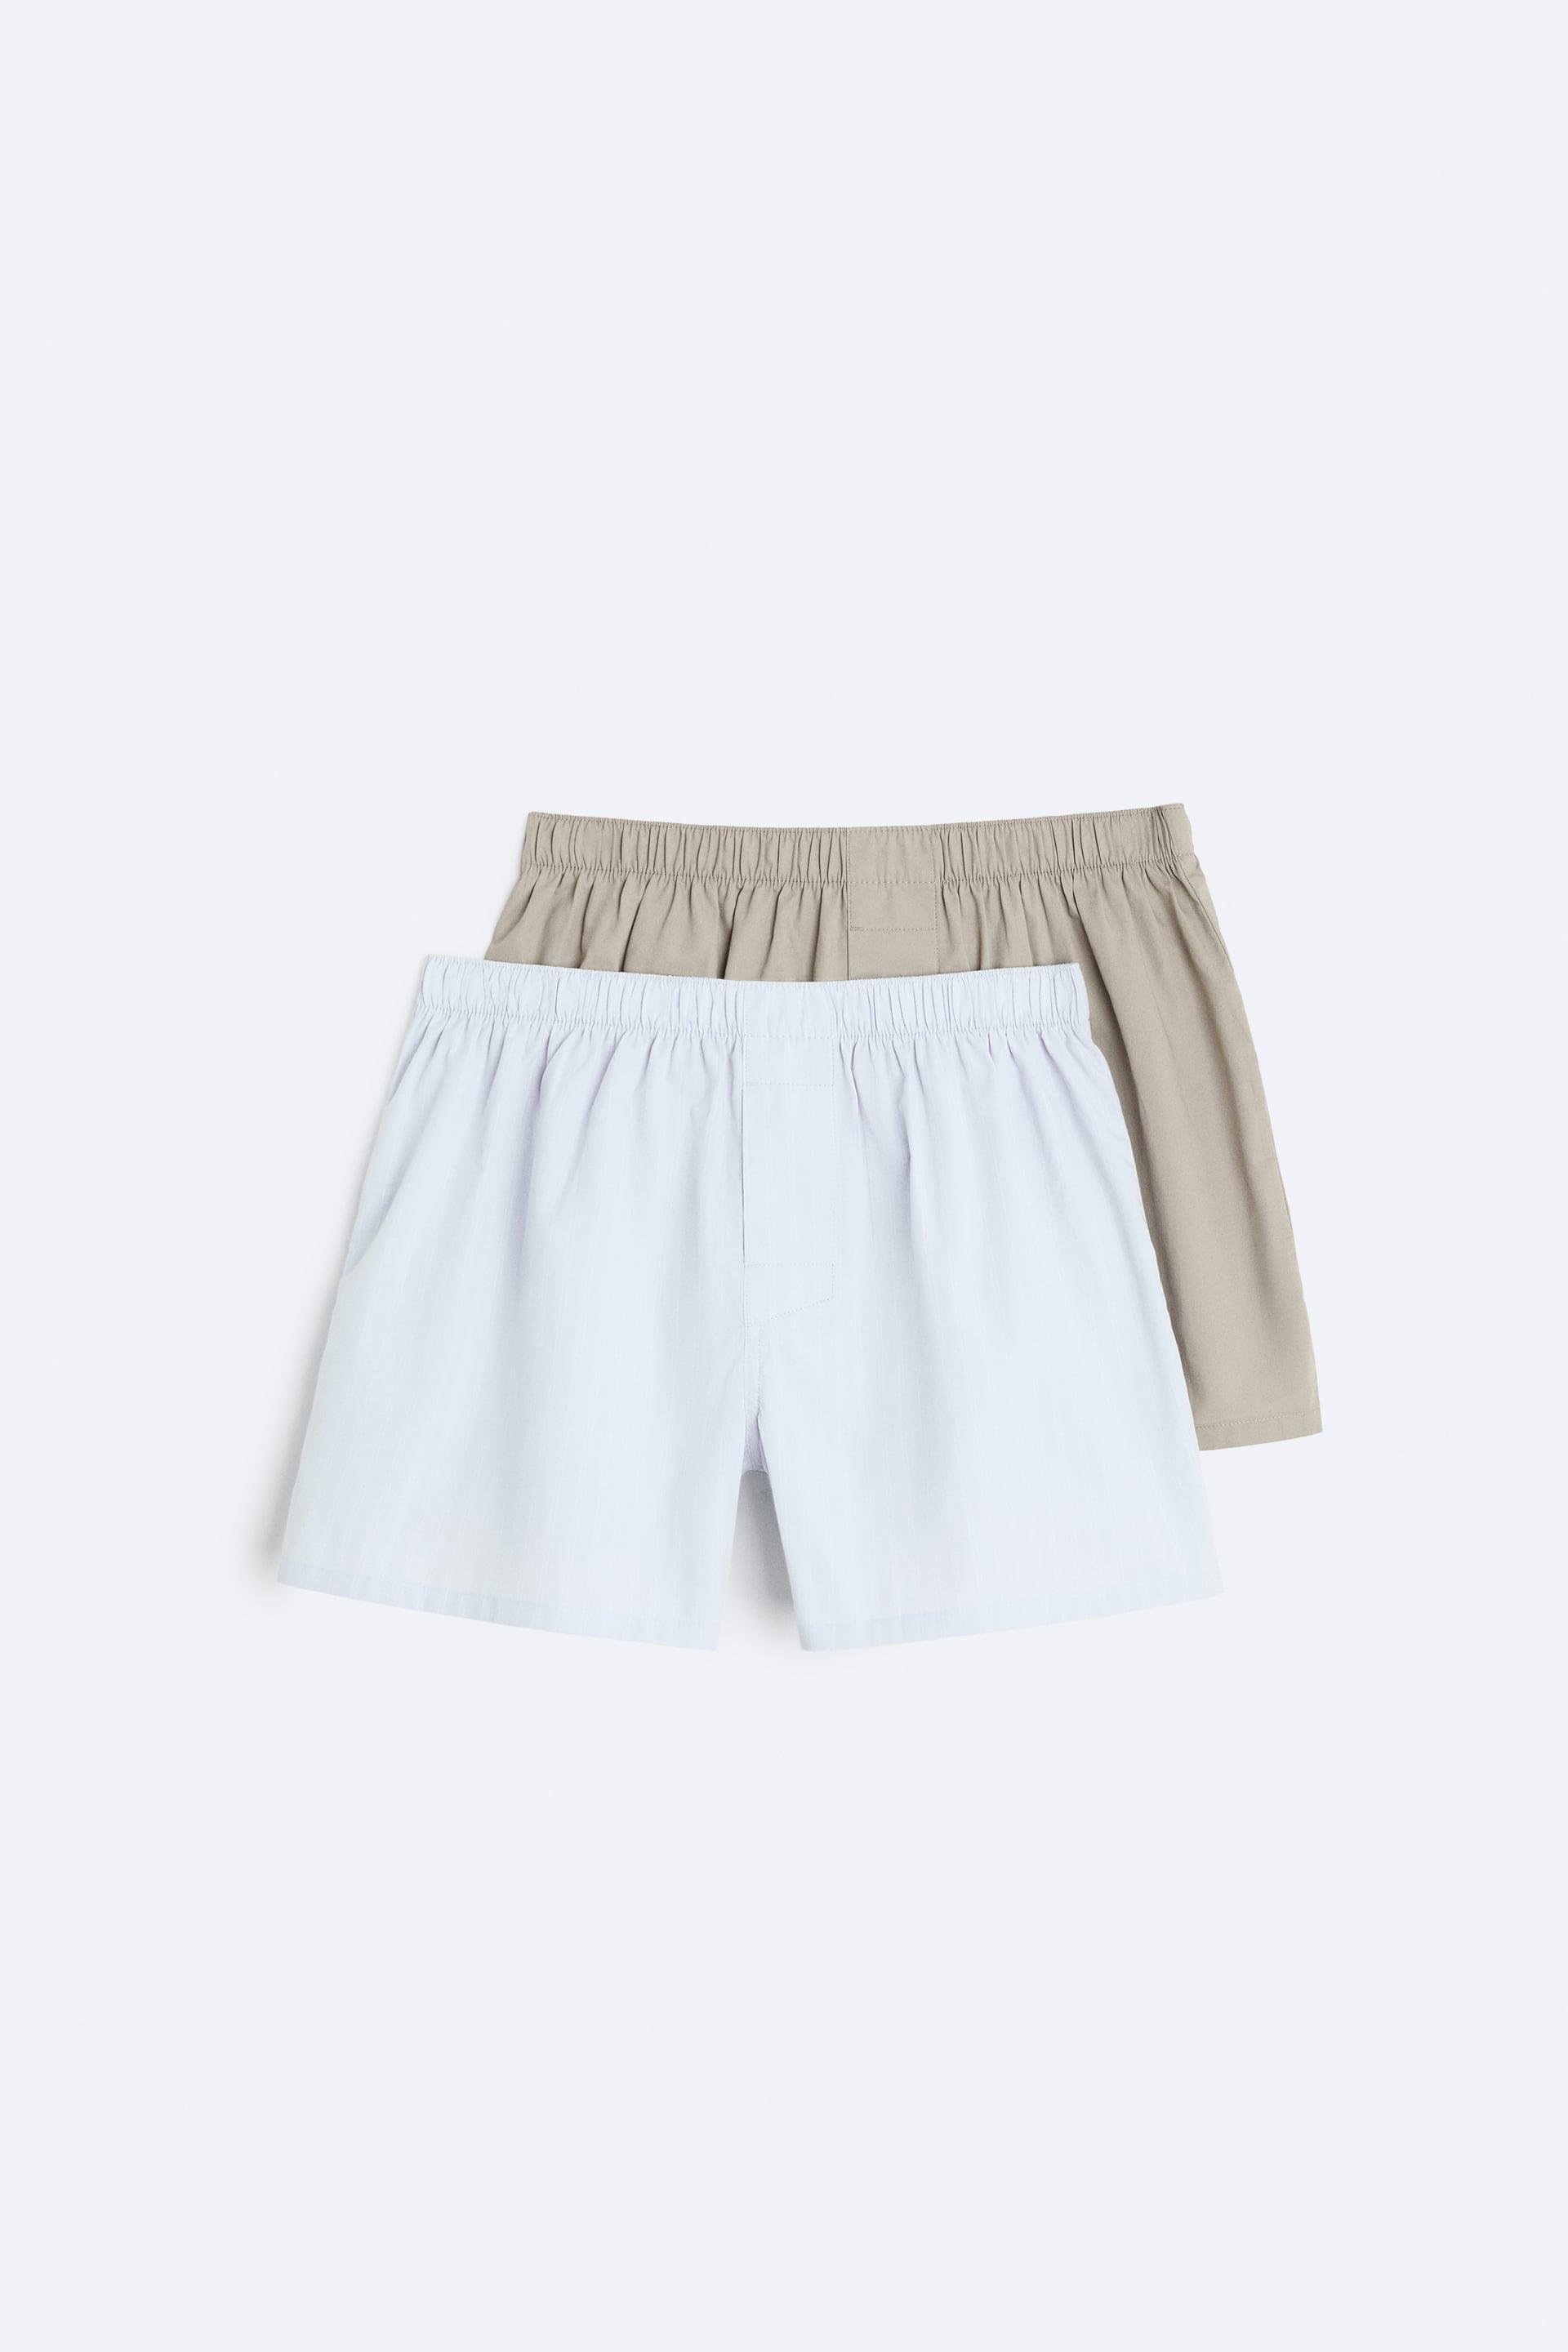 2 PACK OF MIXED POPLIN BOXERS by ZARA